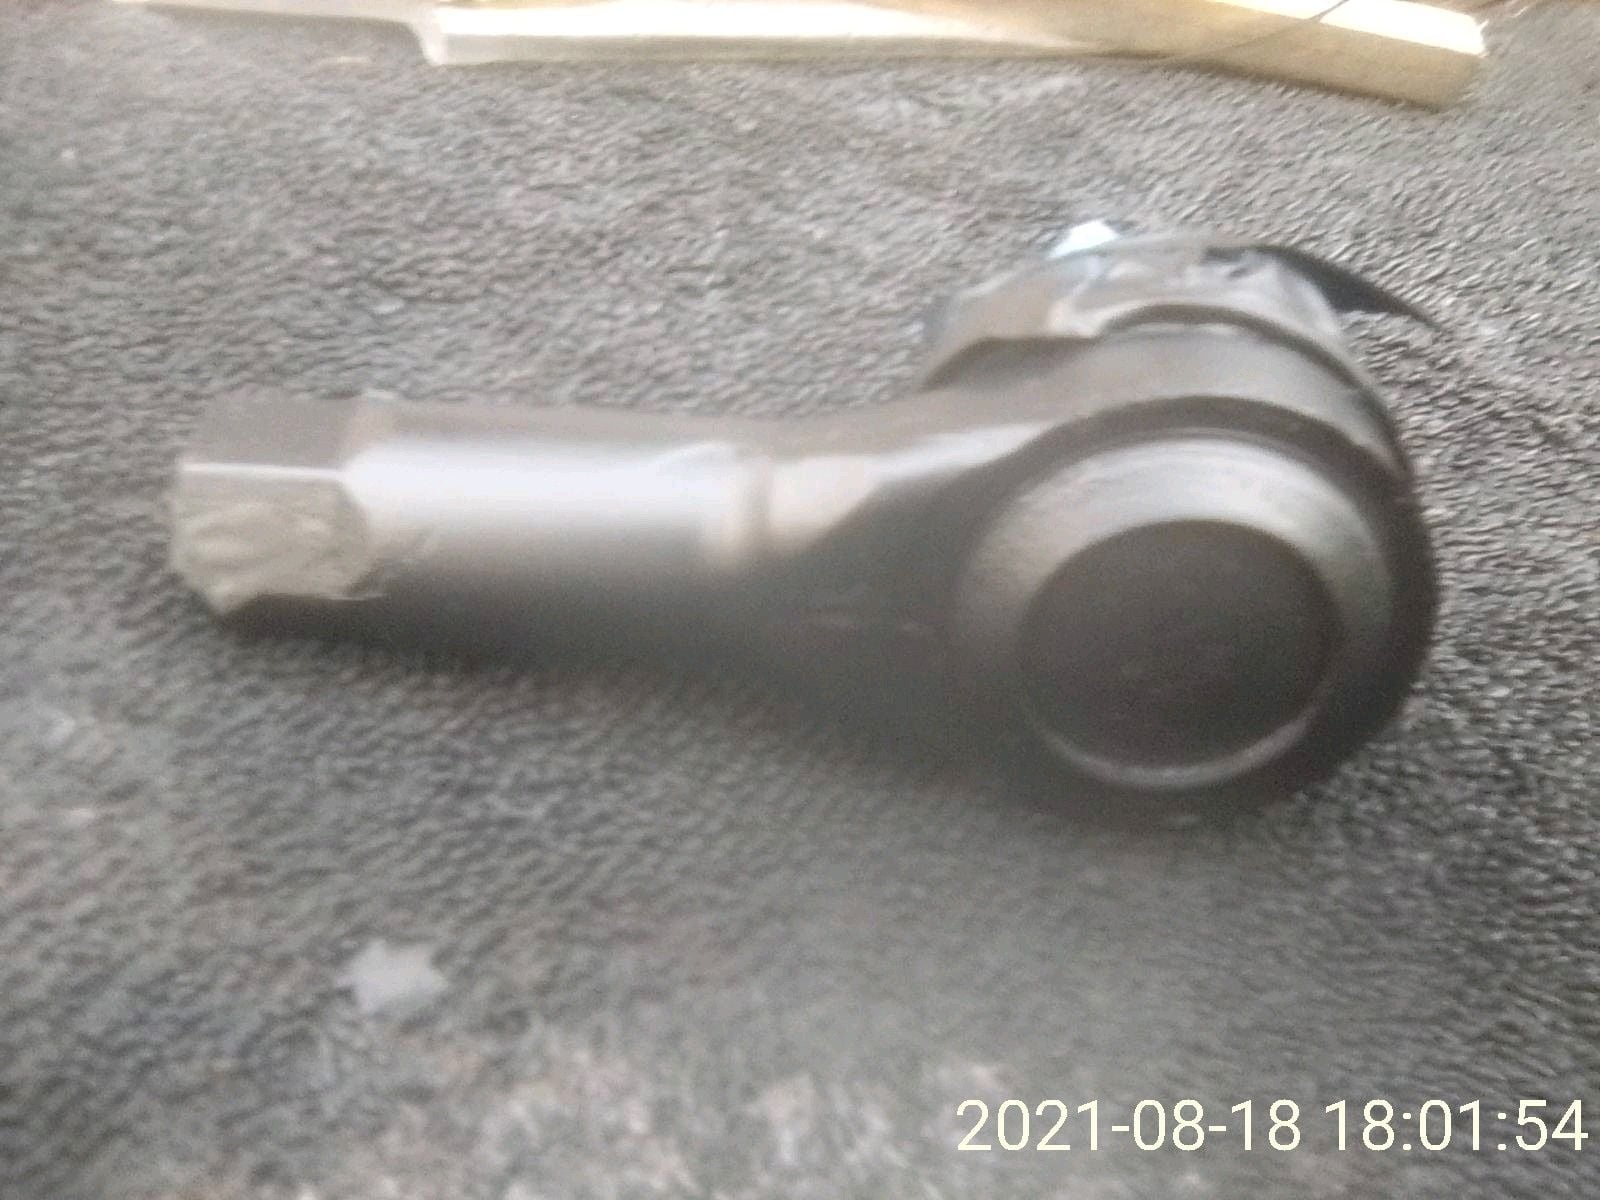 Steering/Suspension - FD - OEM End Ball Joint - New - San Jose, CA 95121, United States